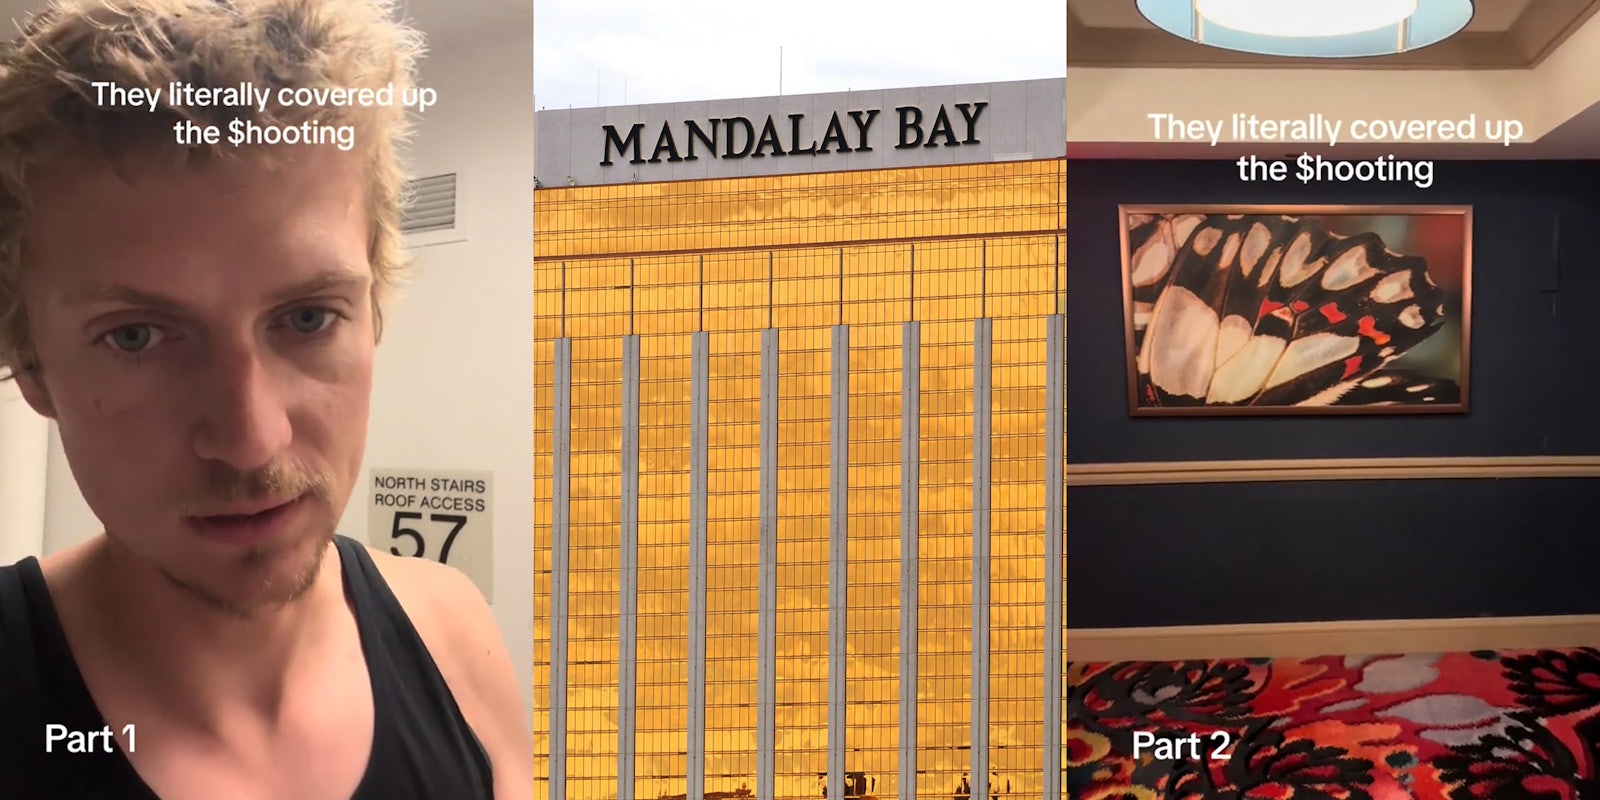 man speaking in Mandalay Bay level 57 with caption 'They literally covered up the $hooting Part 1' (l) Mandalay Bay building with sign (c) Mandalay Bay room with painting on wall with caption 'They literally covered up the $hooting Part 2' (r)